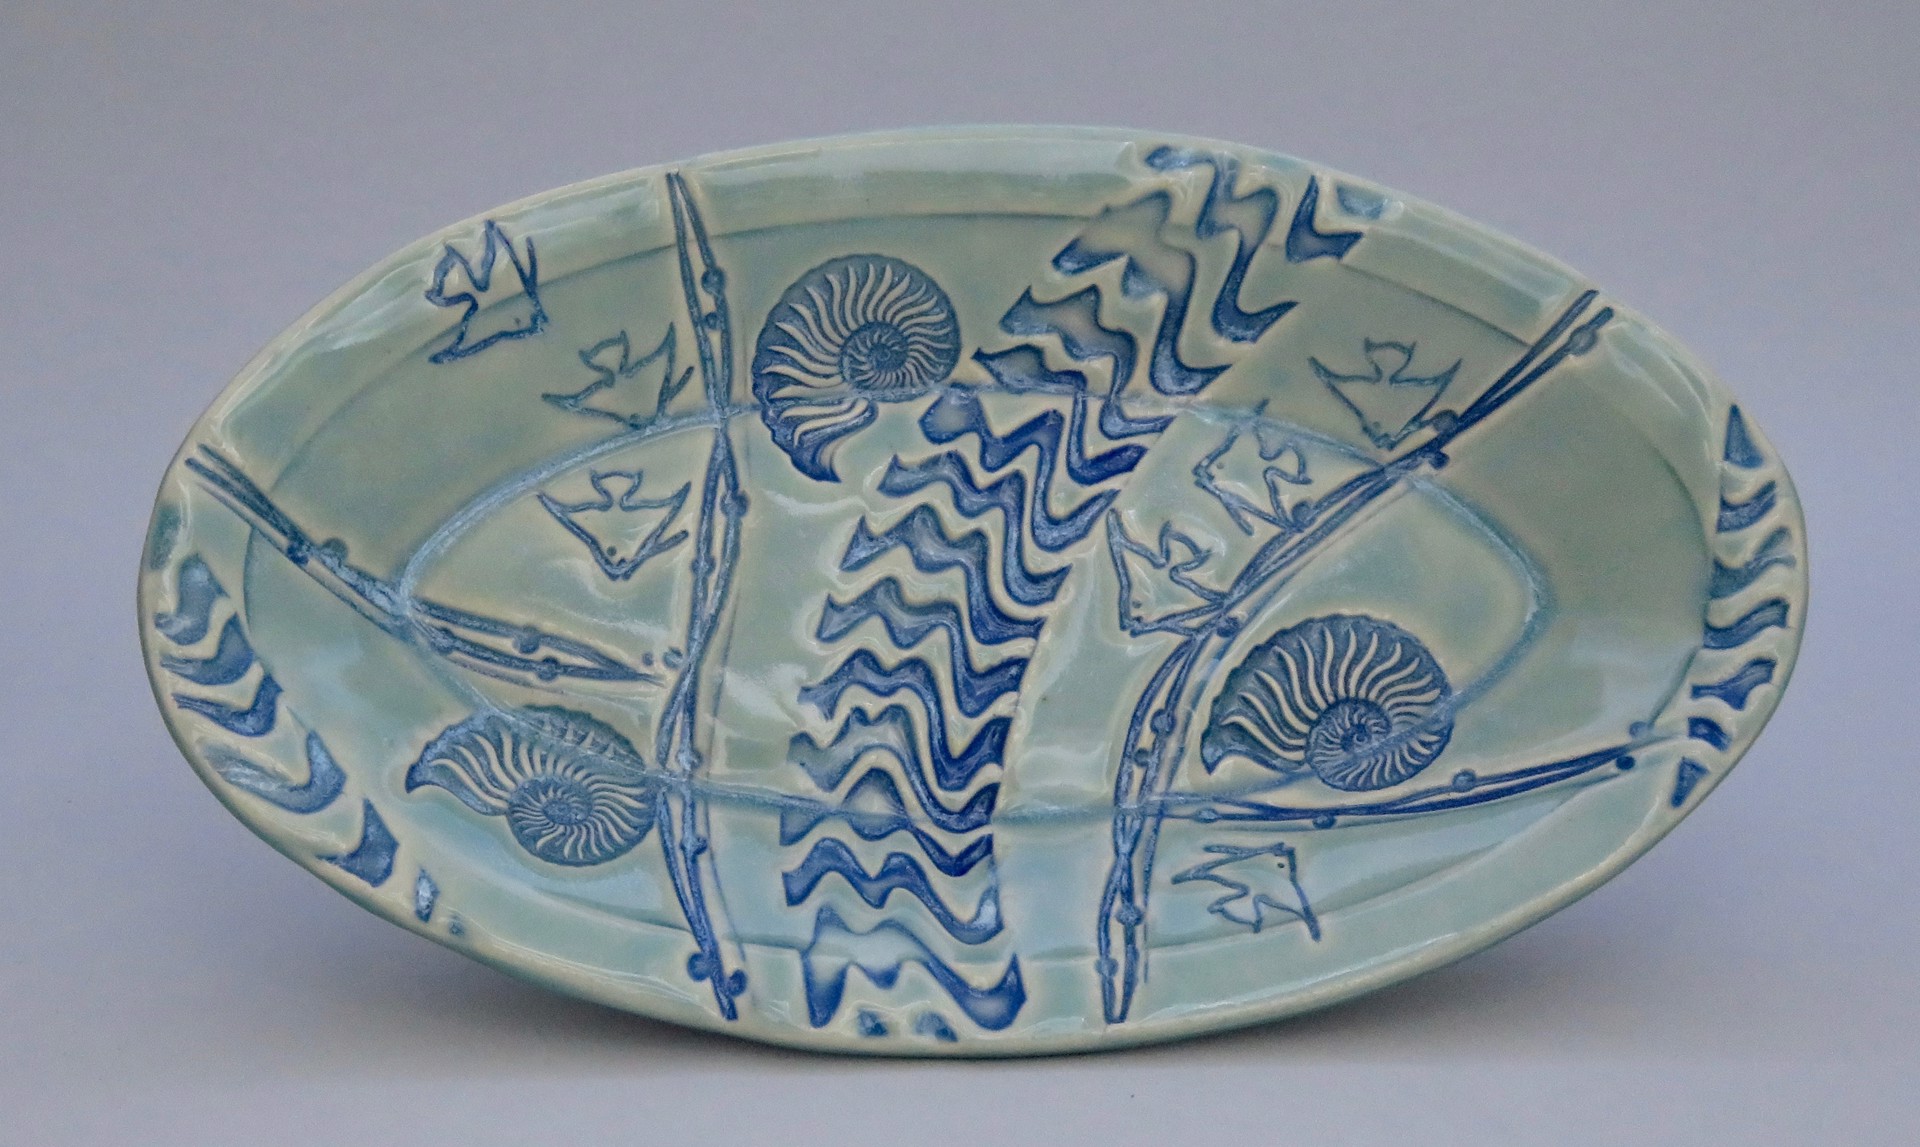 Oval Plate - Light Turquoise; MB#8, by Marty Biernbaum